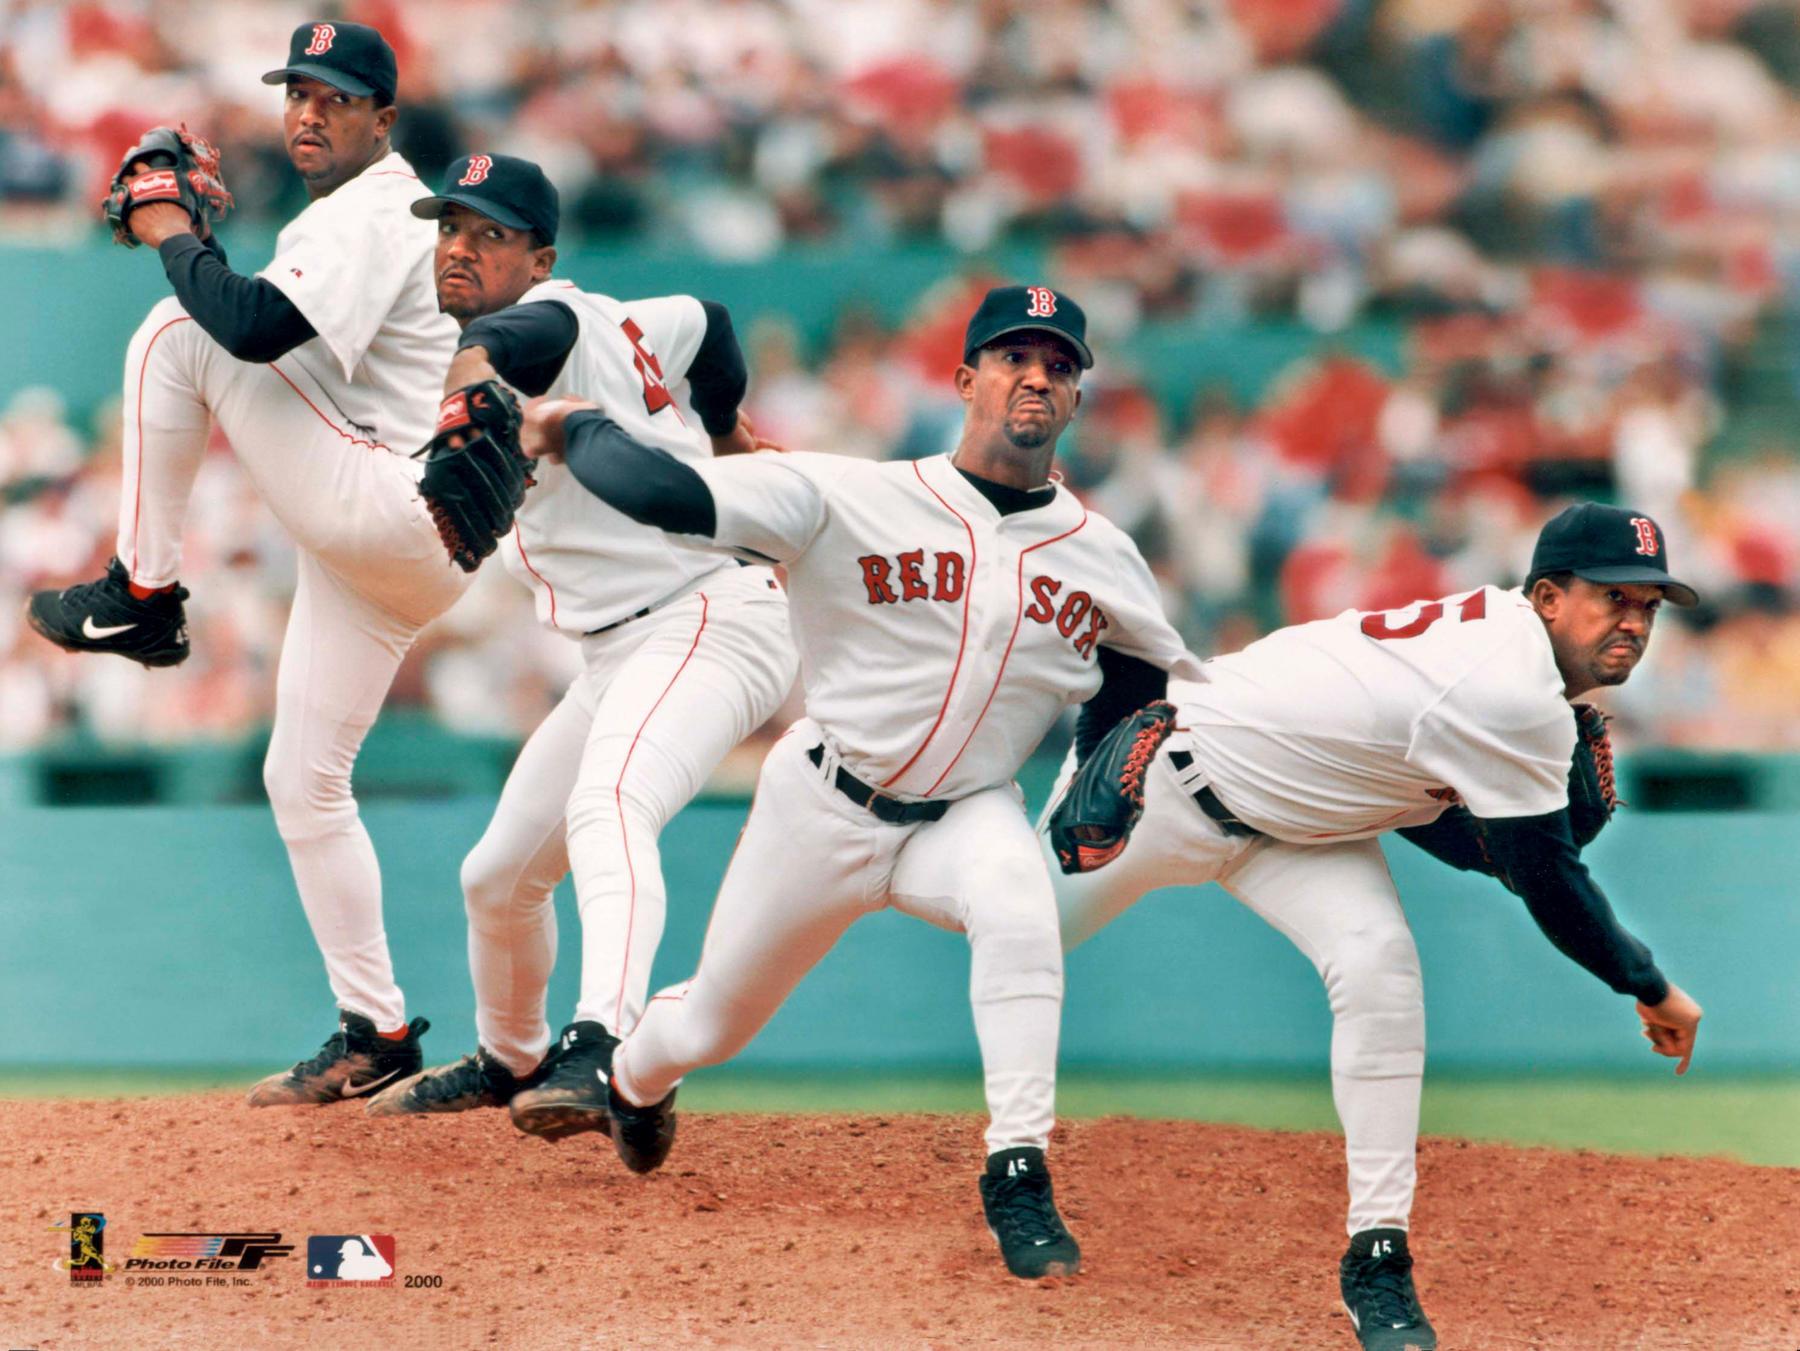 Strong case for Pedro Martinez, Curt Schilling for Hall of Fame